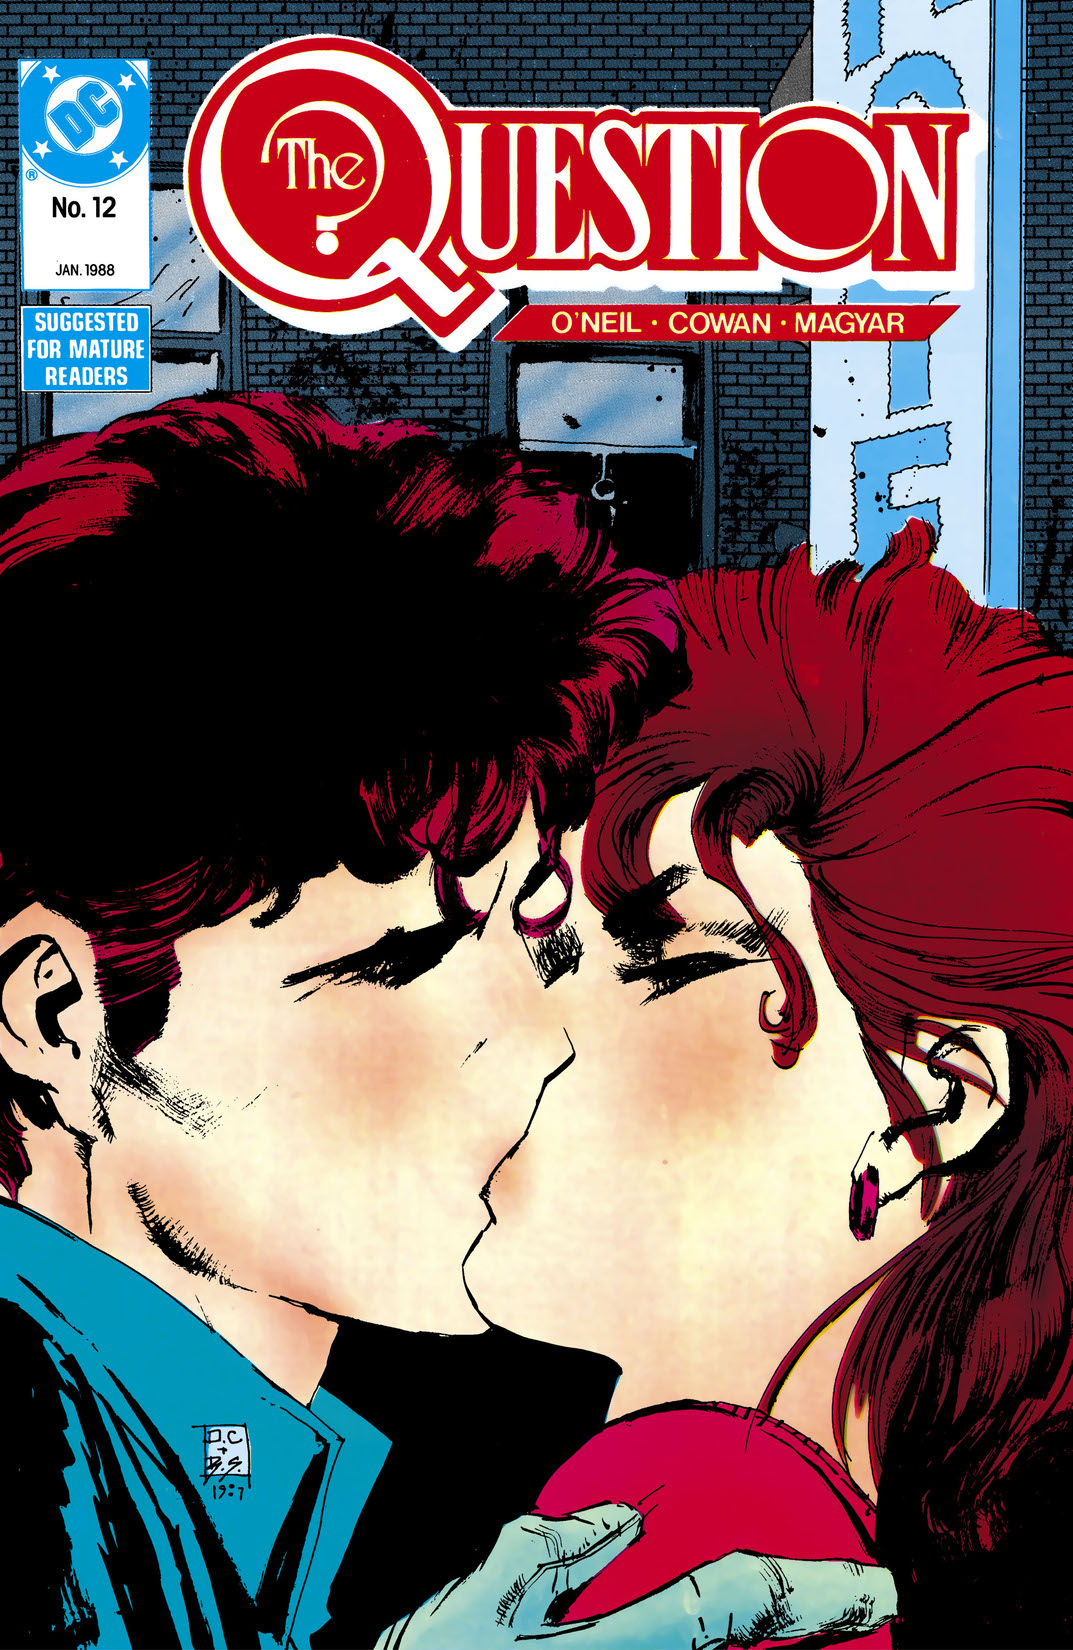 The Question (1986-) #12 preview images